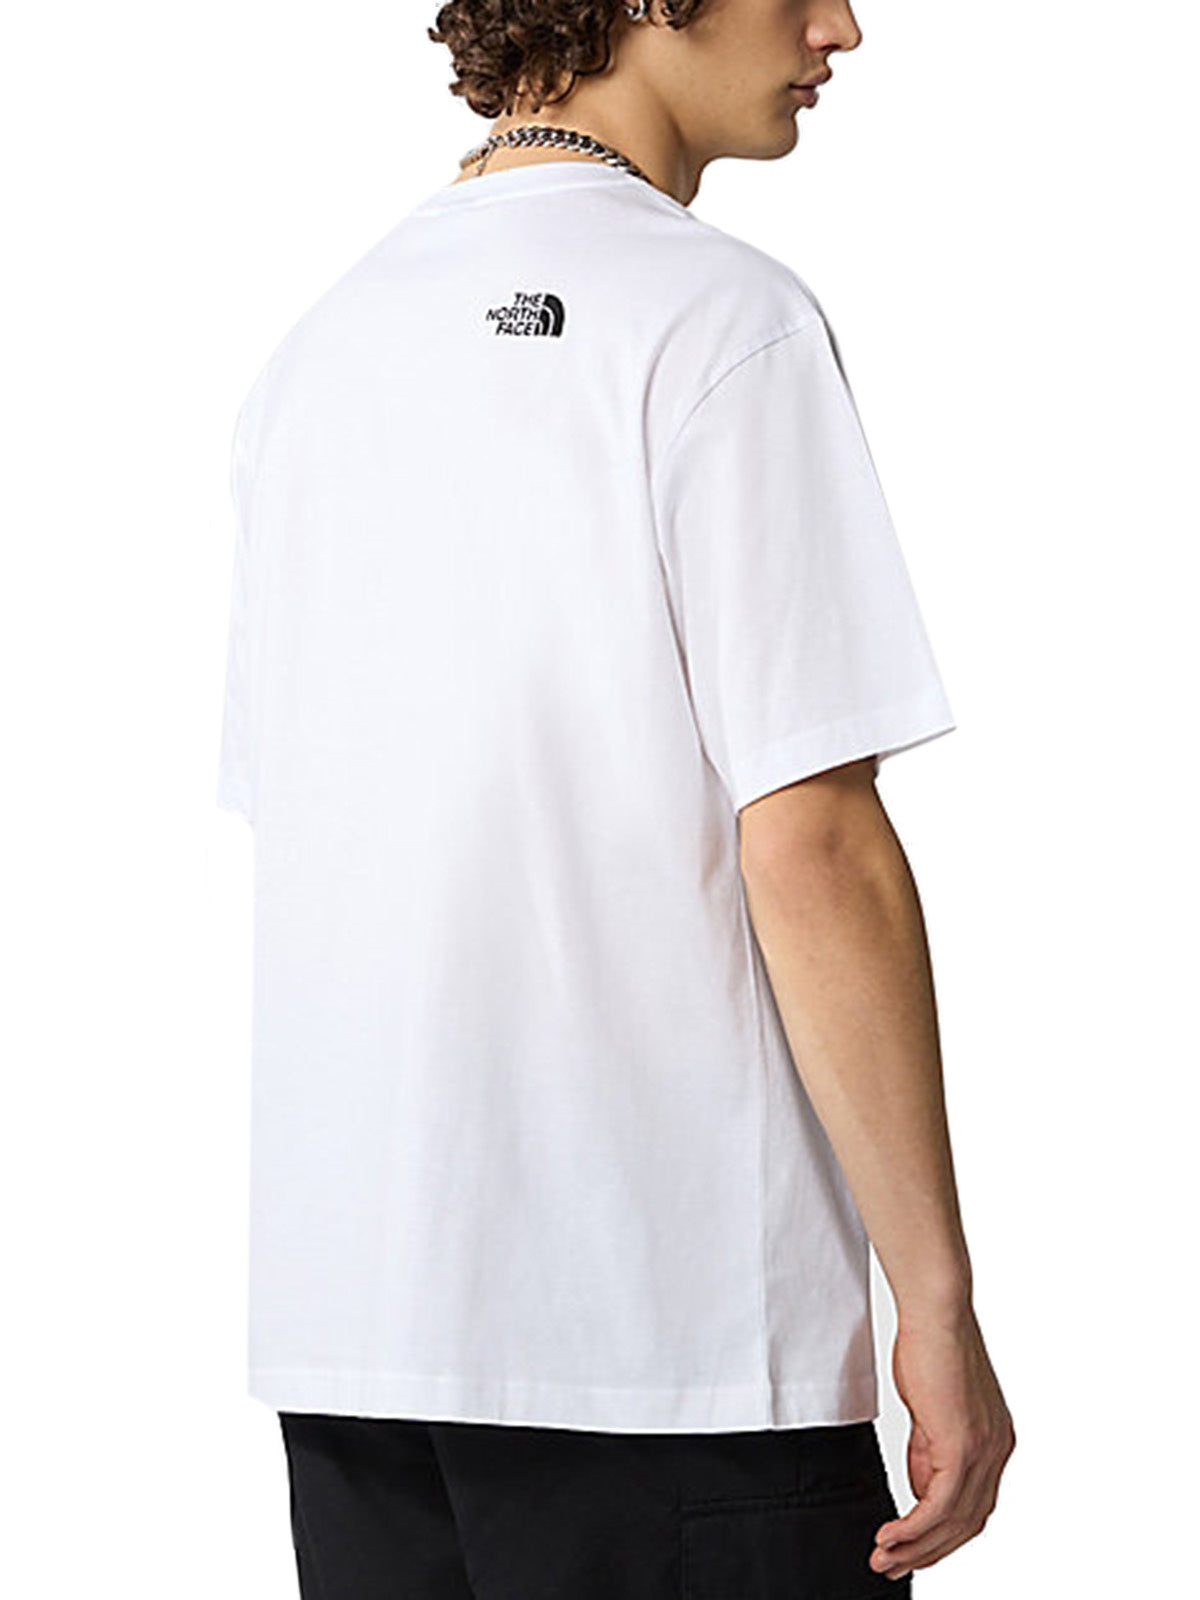 T-shirt Uomo The North Face - T-Shirt Oversize Simple Dome - Bianco